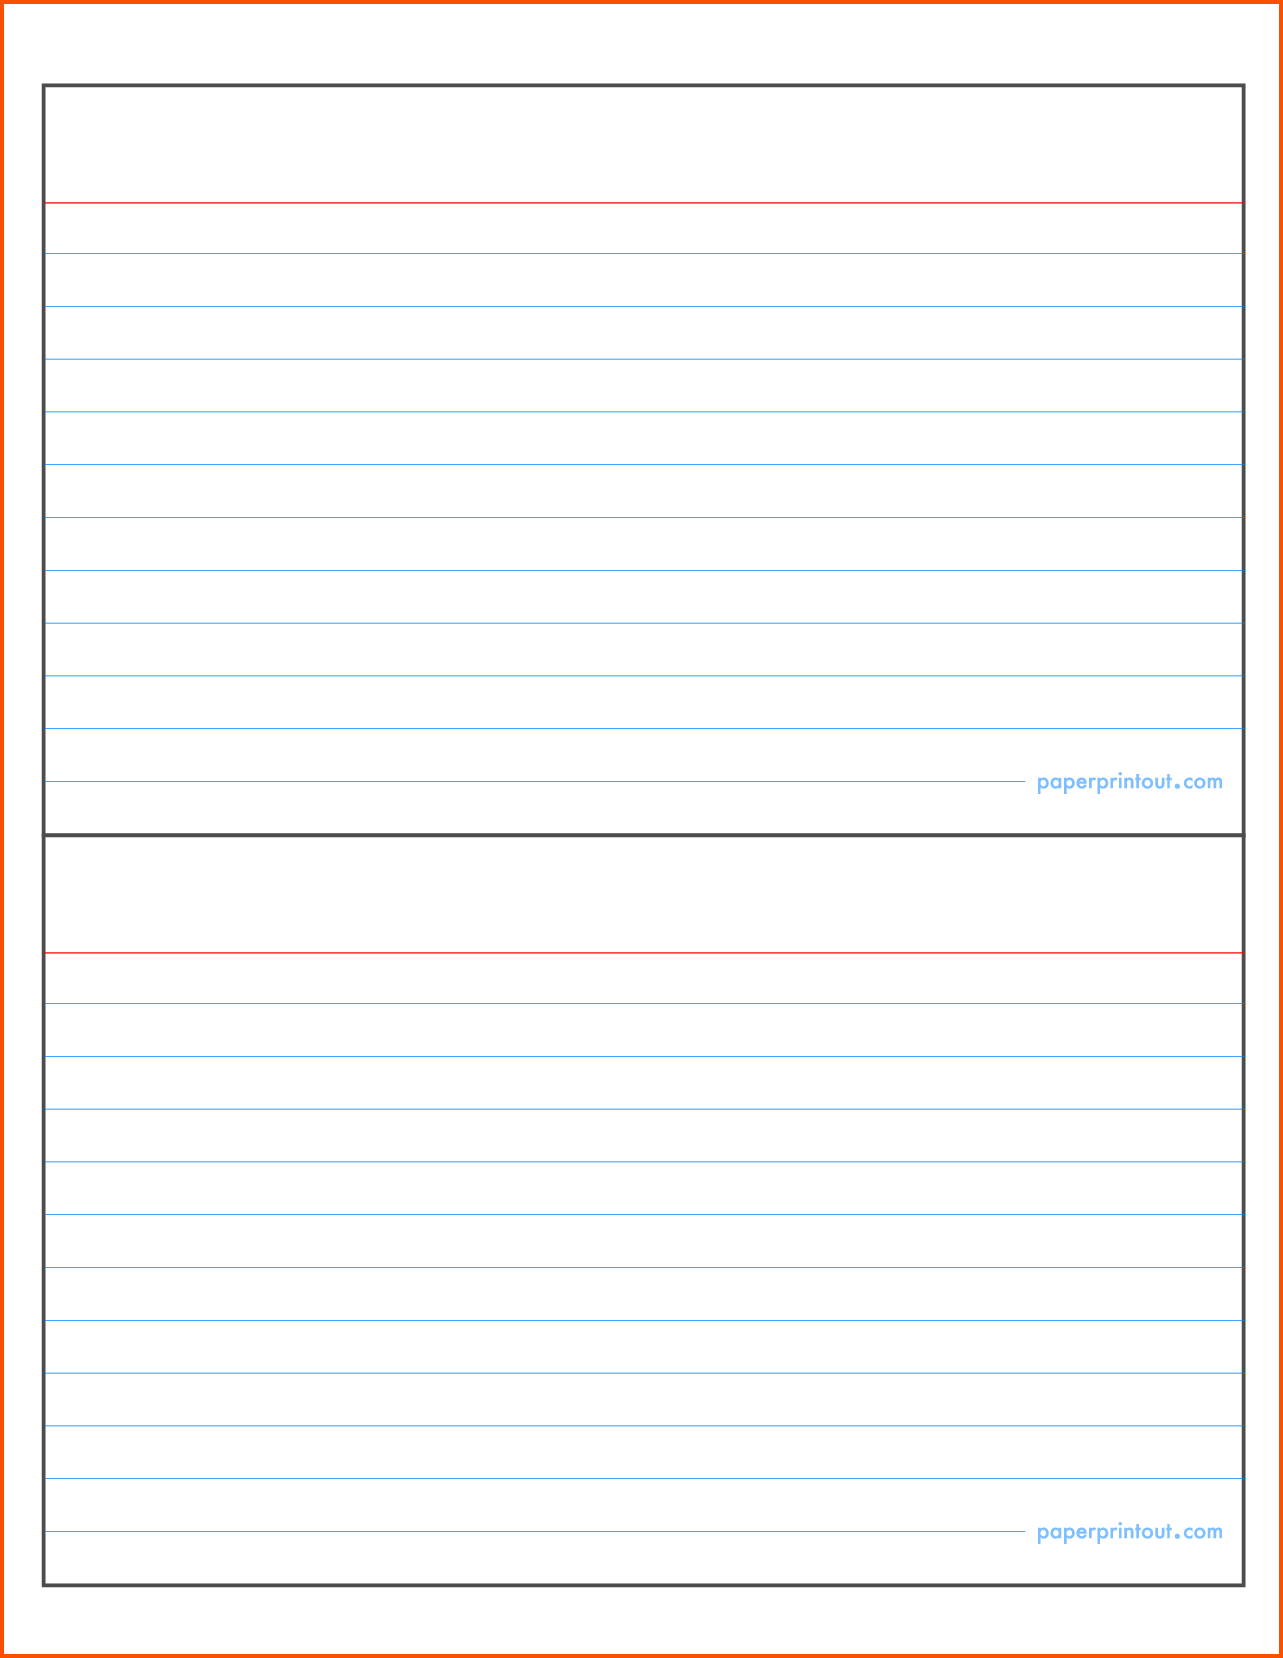 word-template-for-3x5-index-cards-great-sample-templates